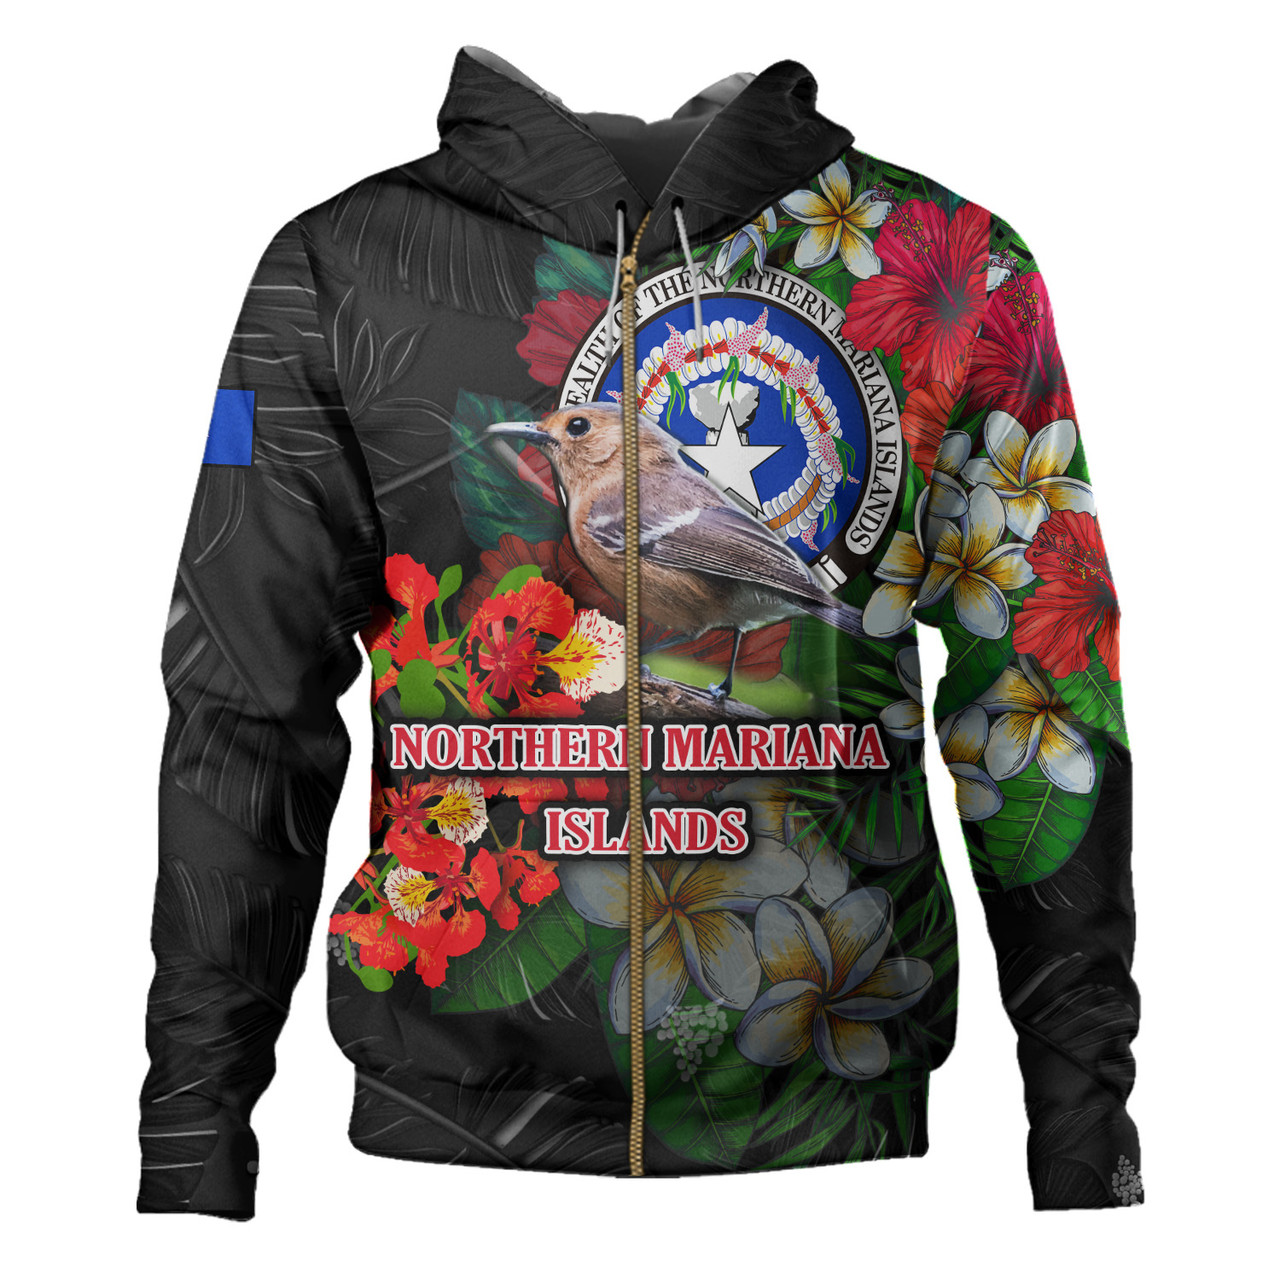 Northern Mariana Islands Hoodie Hibiscus And Plumeria With Palm Branches Vintage Style